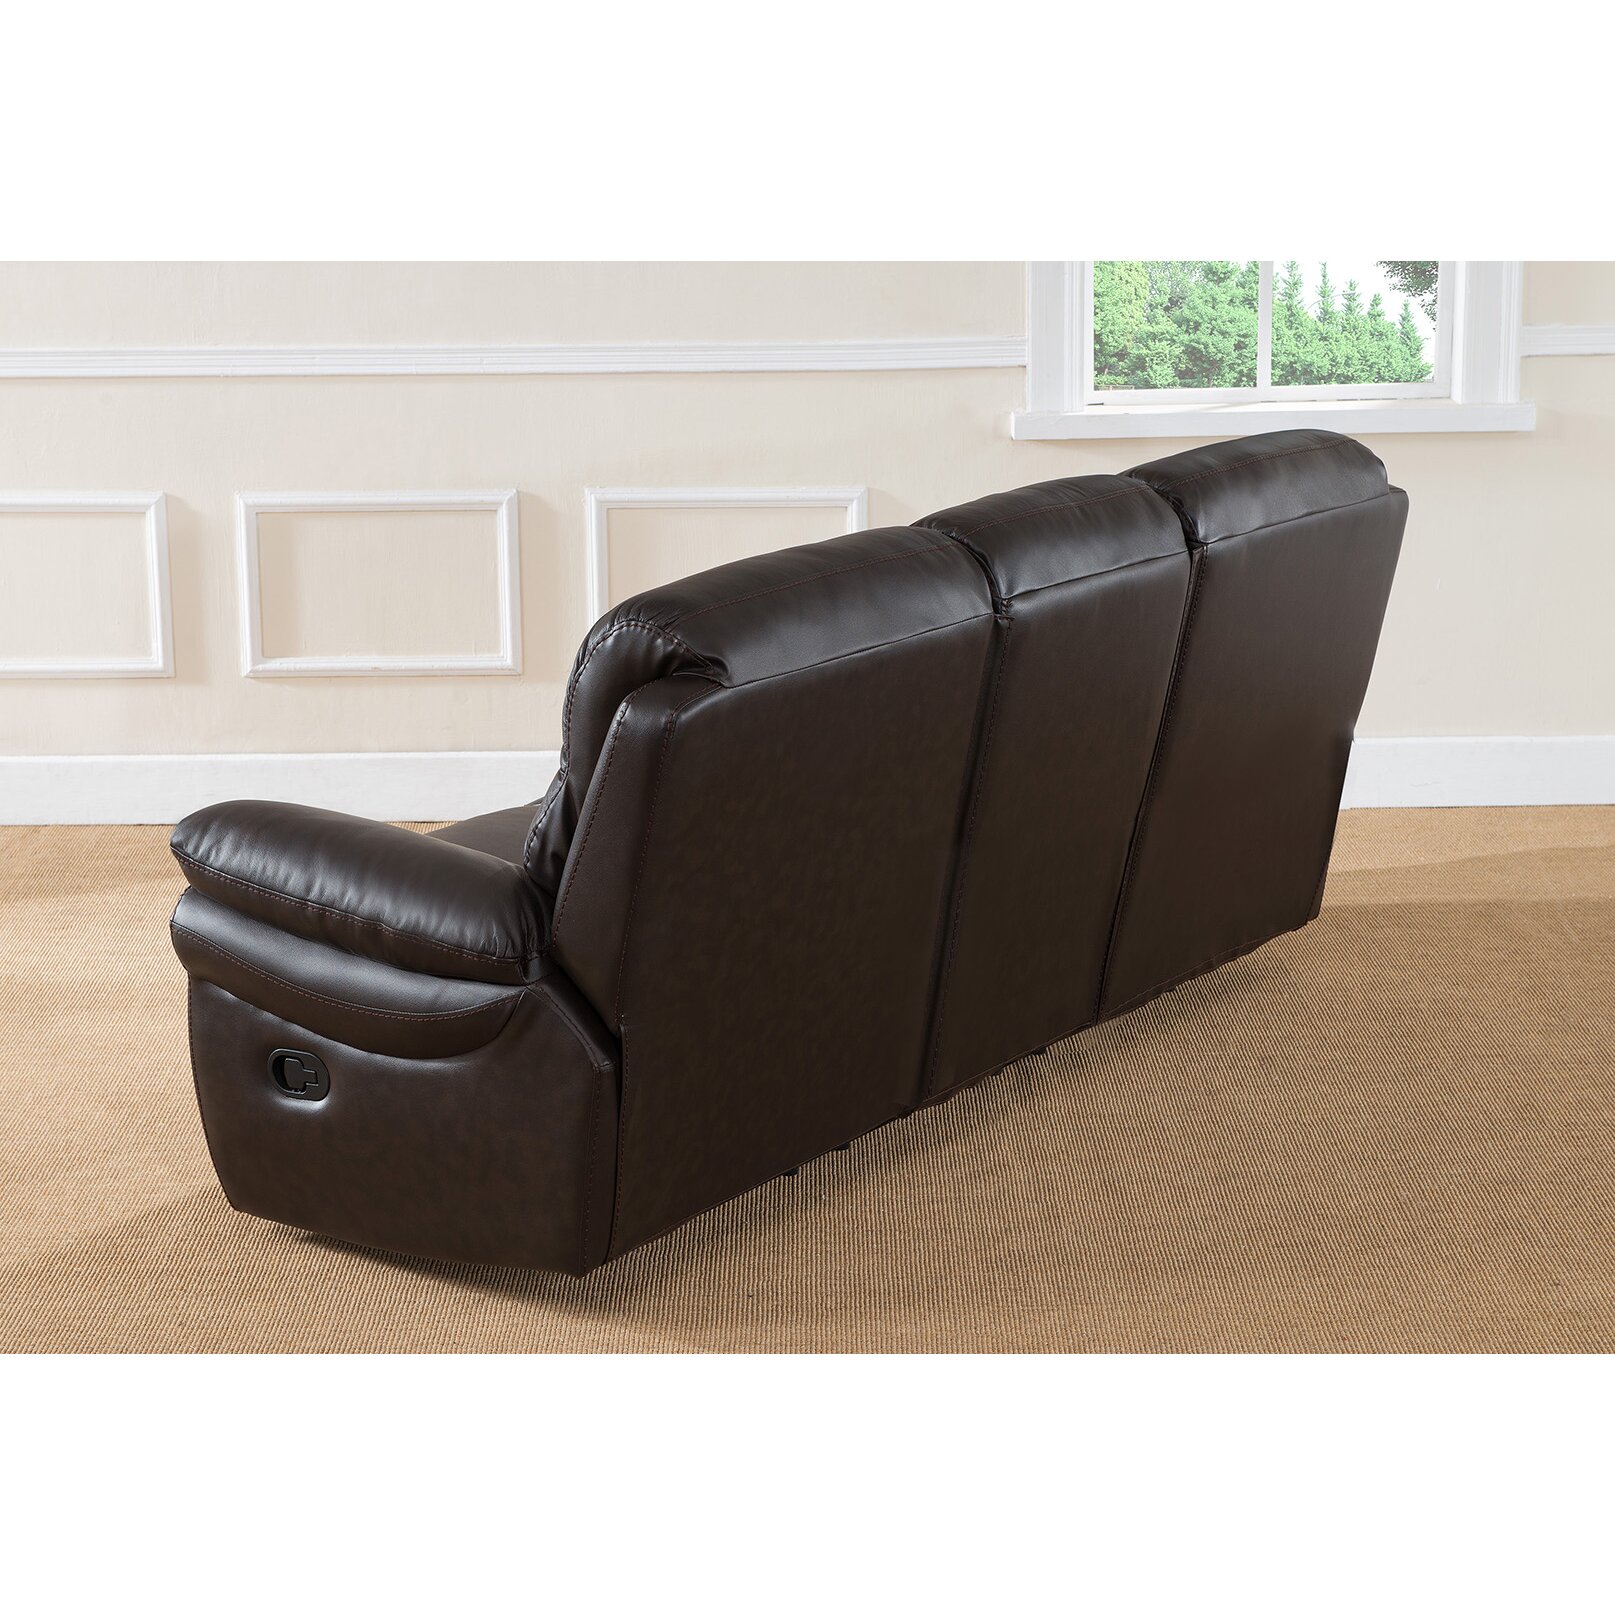 Leather Sofa And Recliner Set barcelona black leather reclining 3